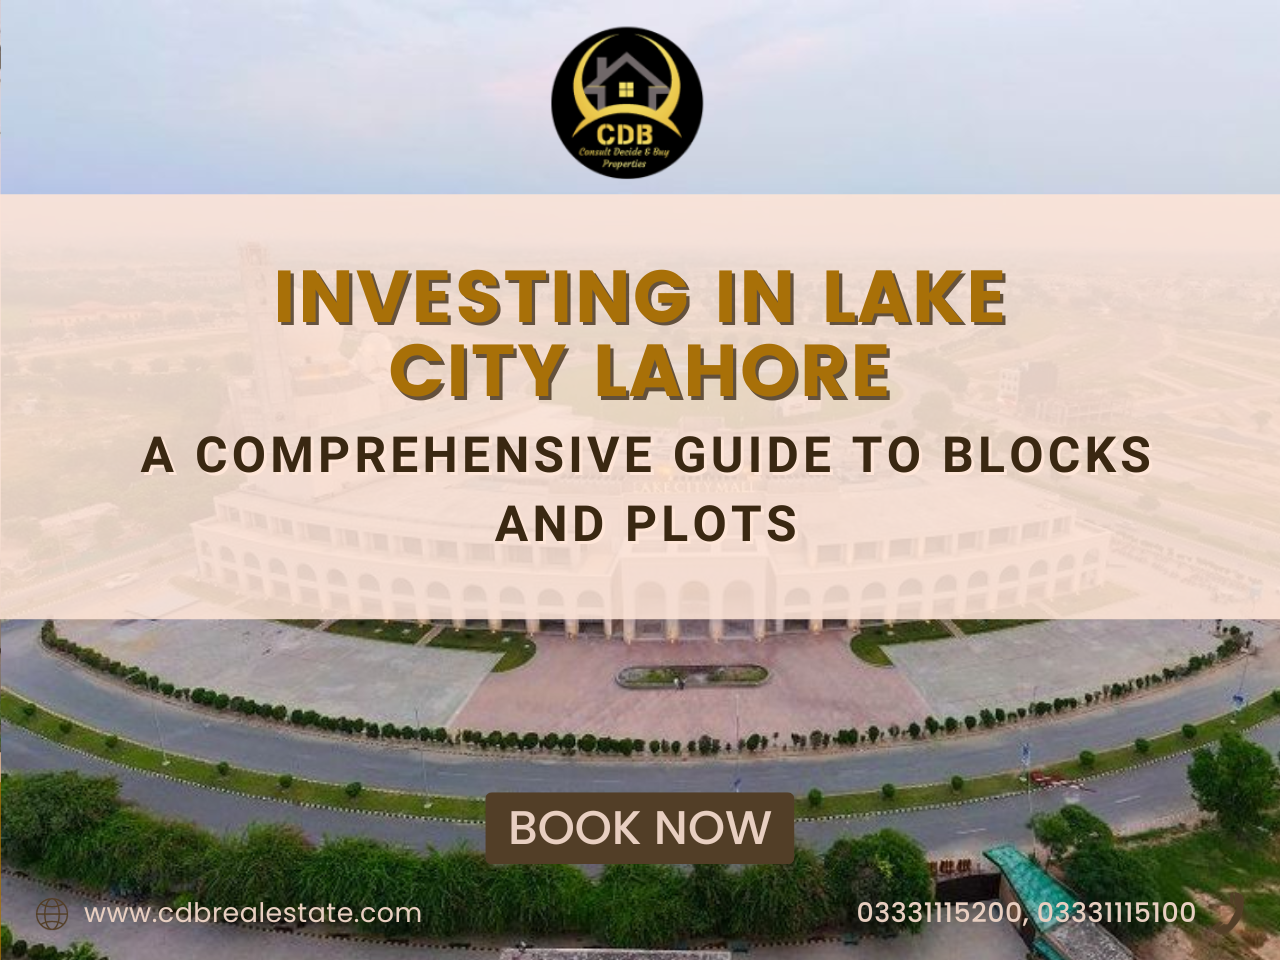 Investing in Lake City Lahore: A Comprehensive Guide to Blocks and Plots